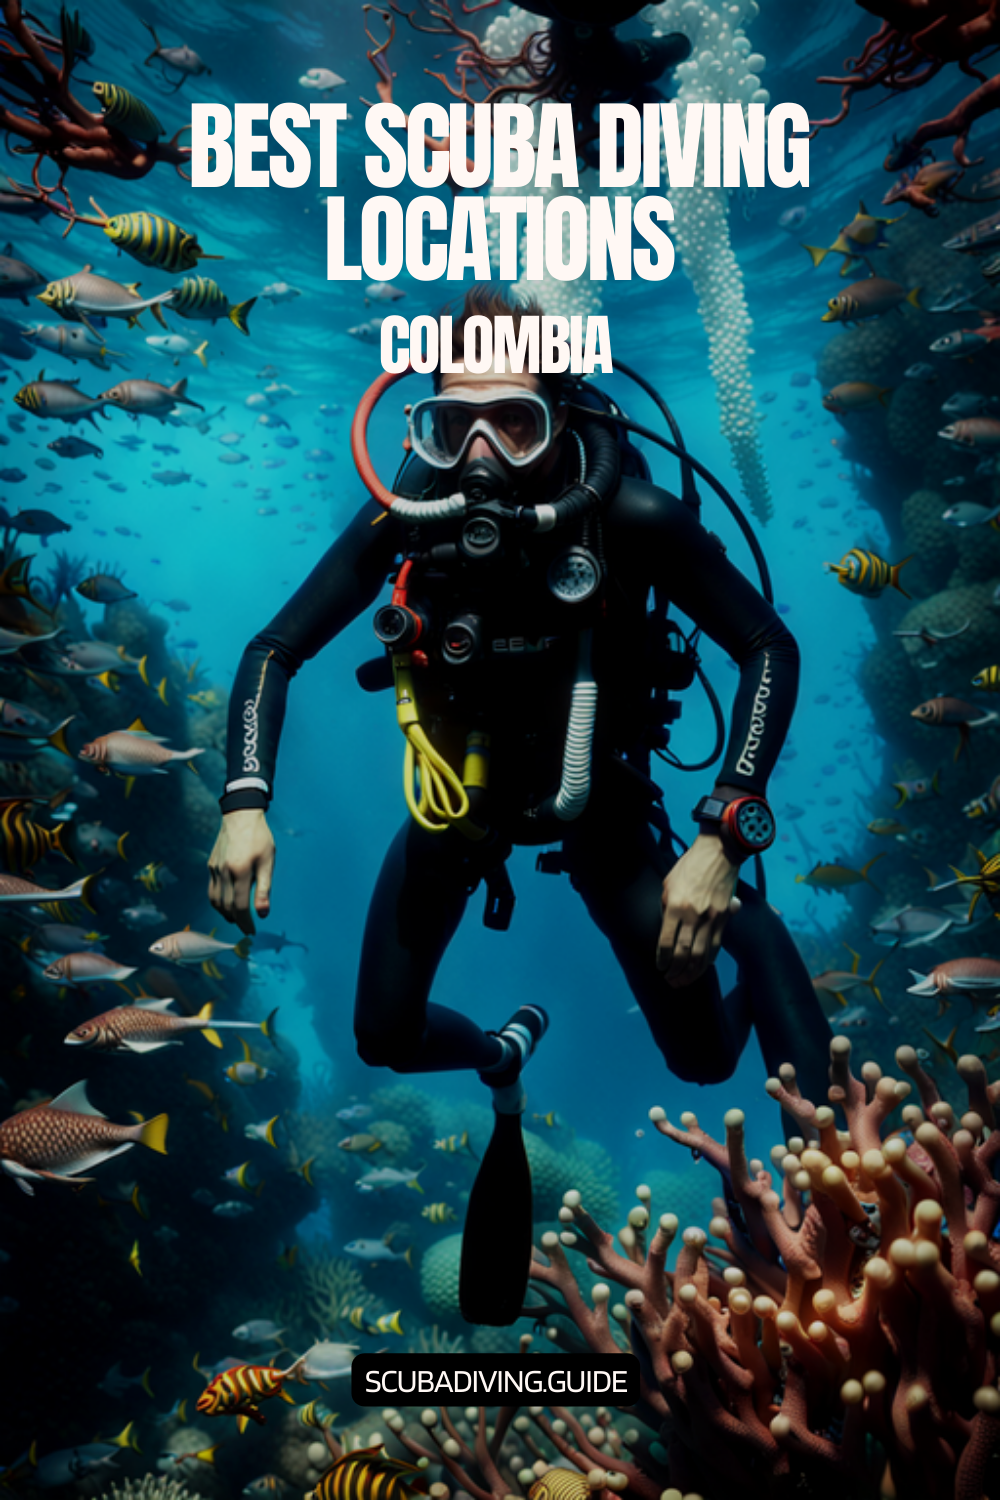 Scuba Diving Locations in Colombia